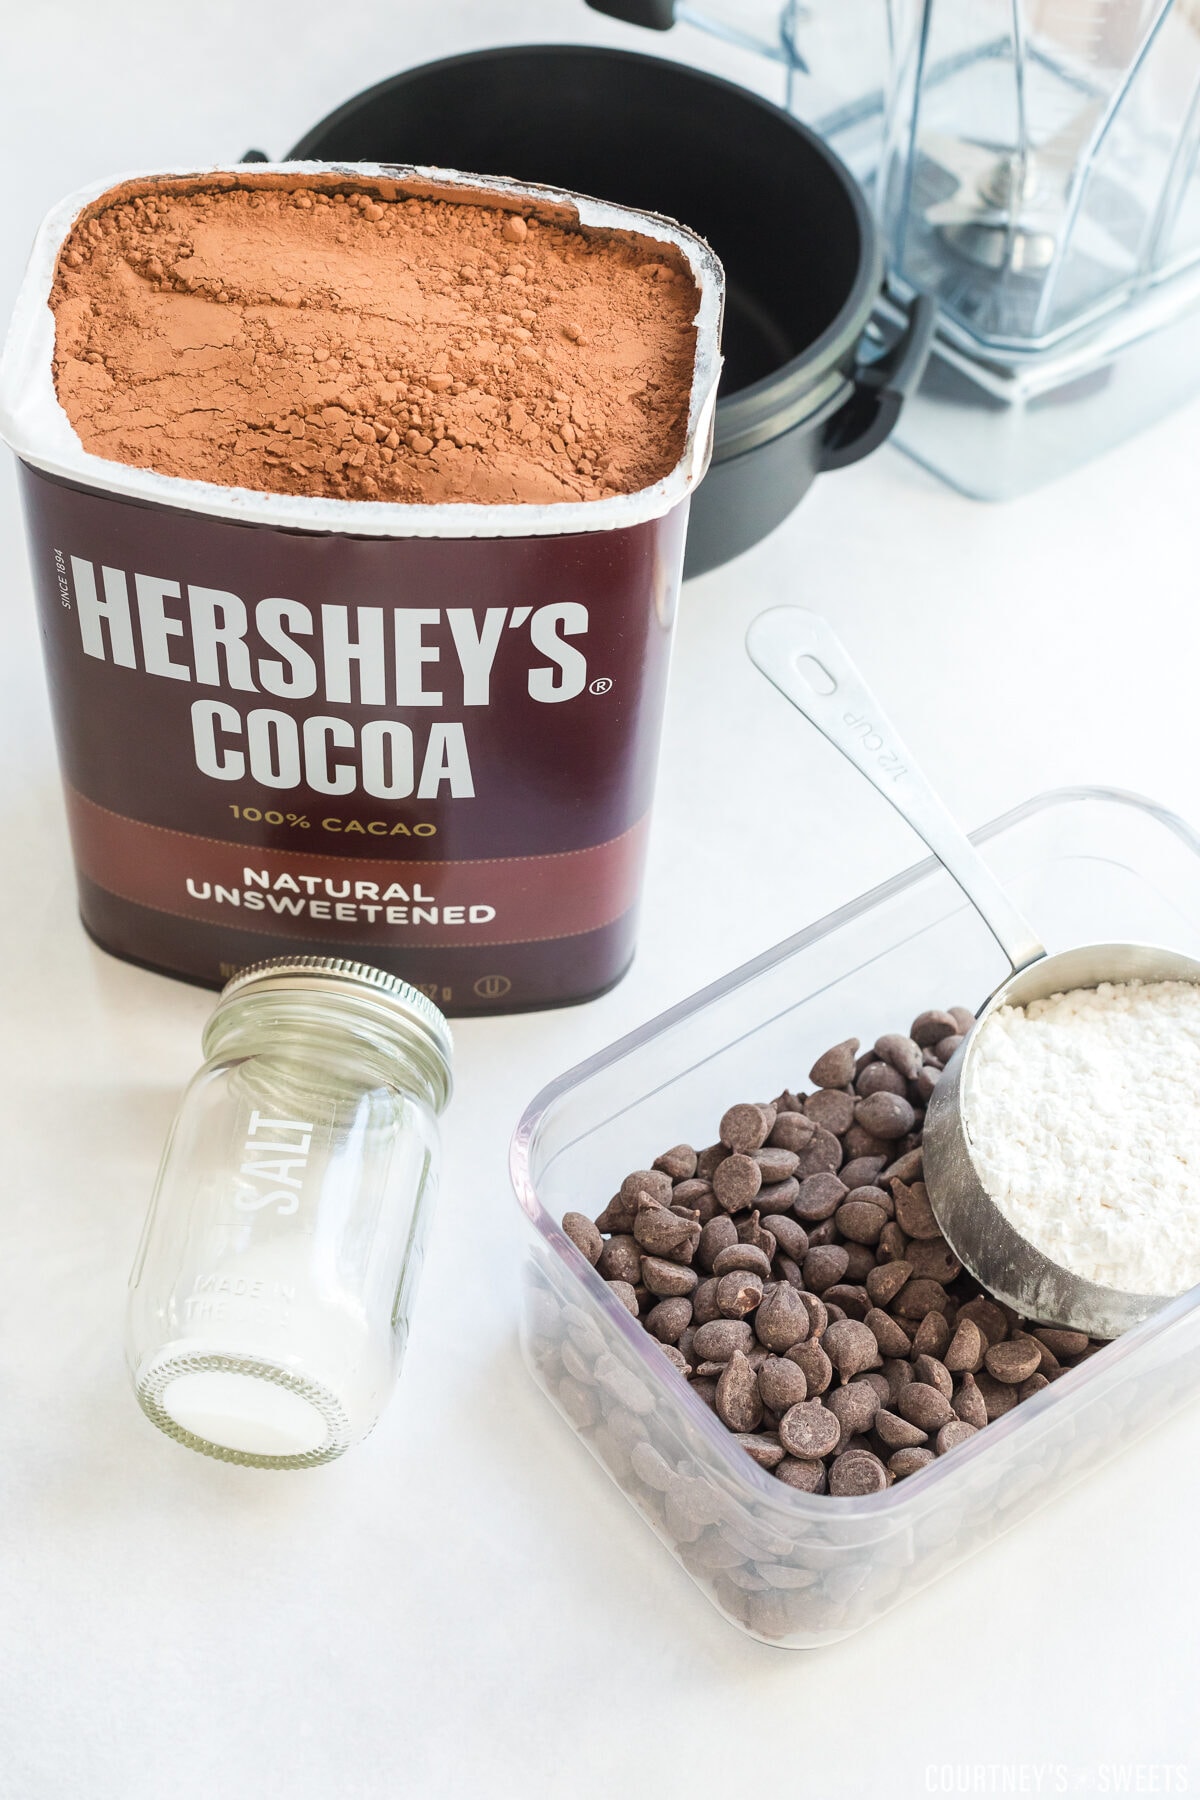 hershey cocoa powder, salt container, chocolate chips in a storage container and a measuring cup filled with powdered sugar on a table